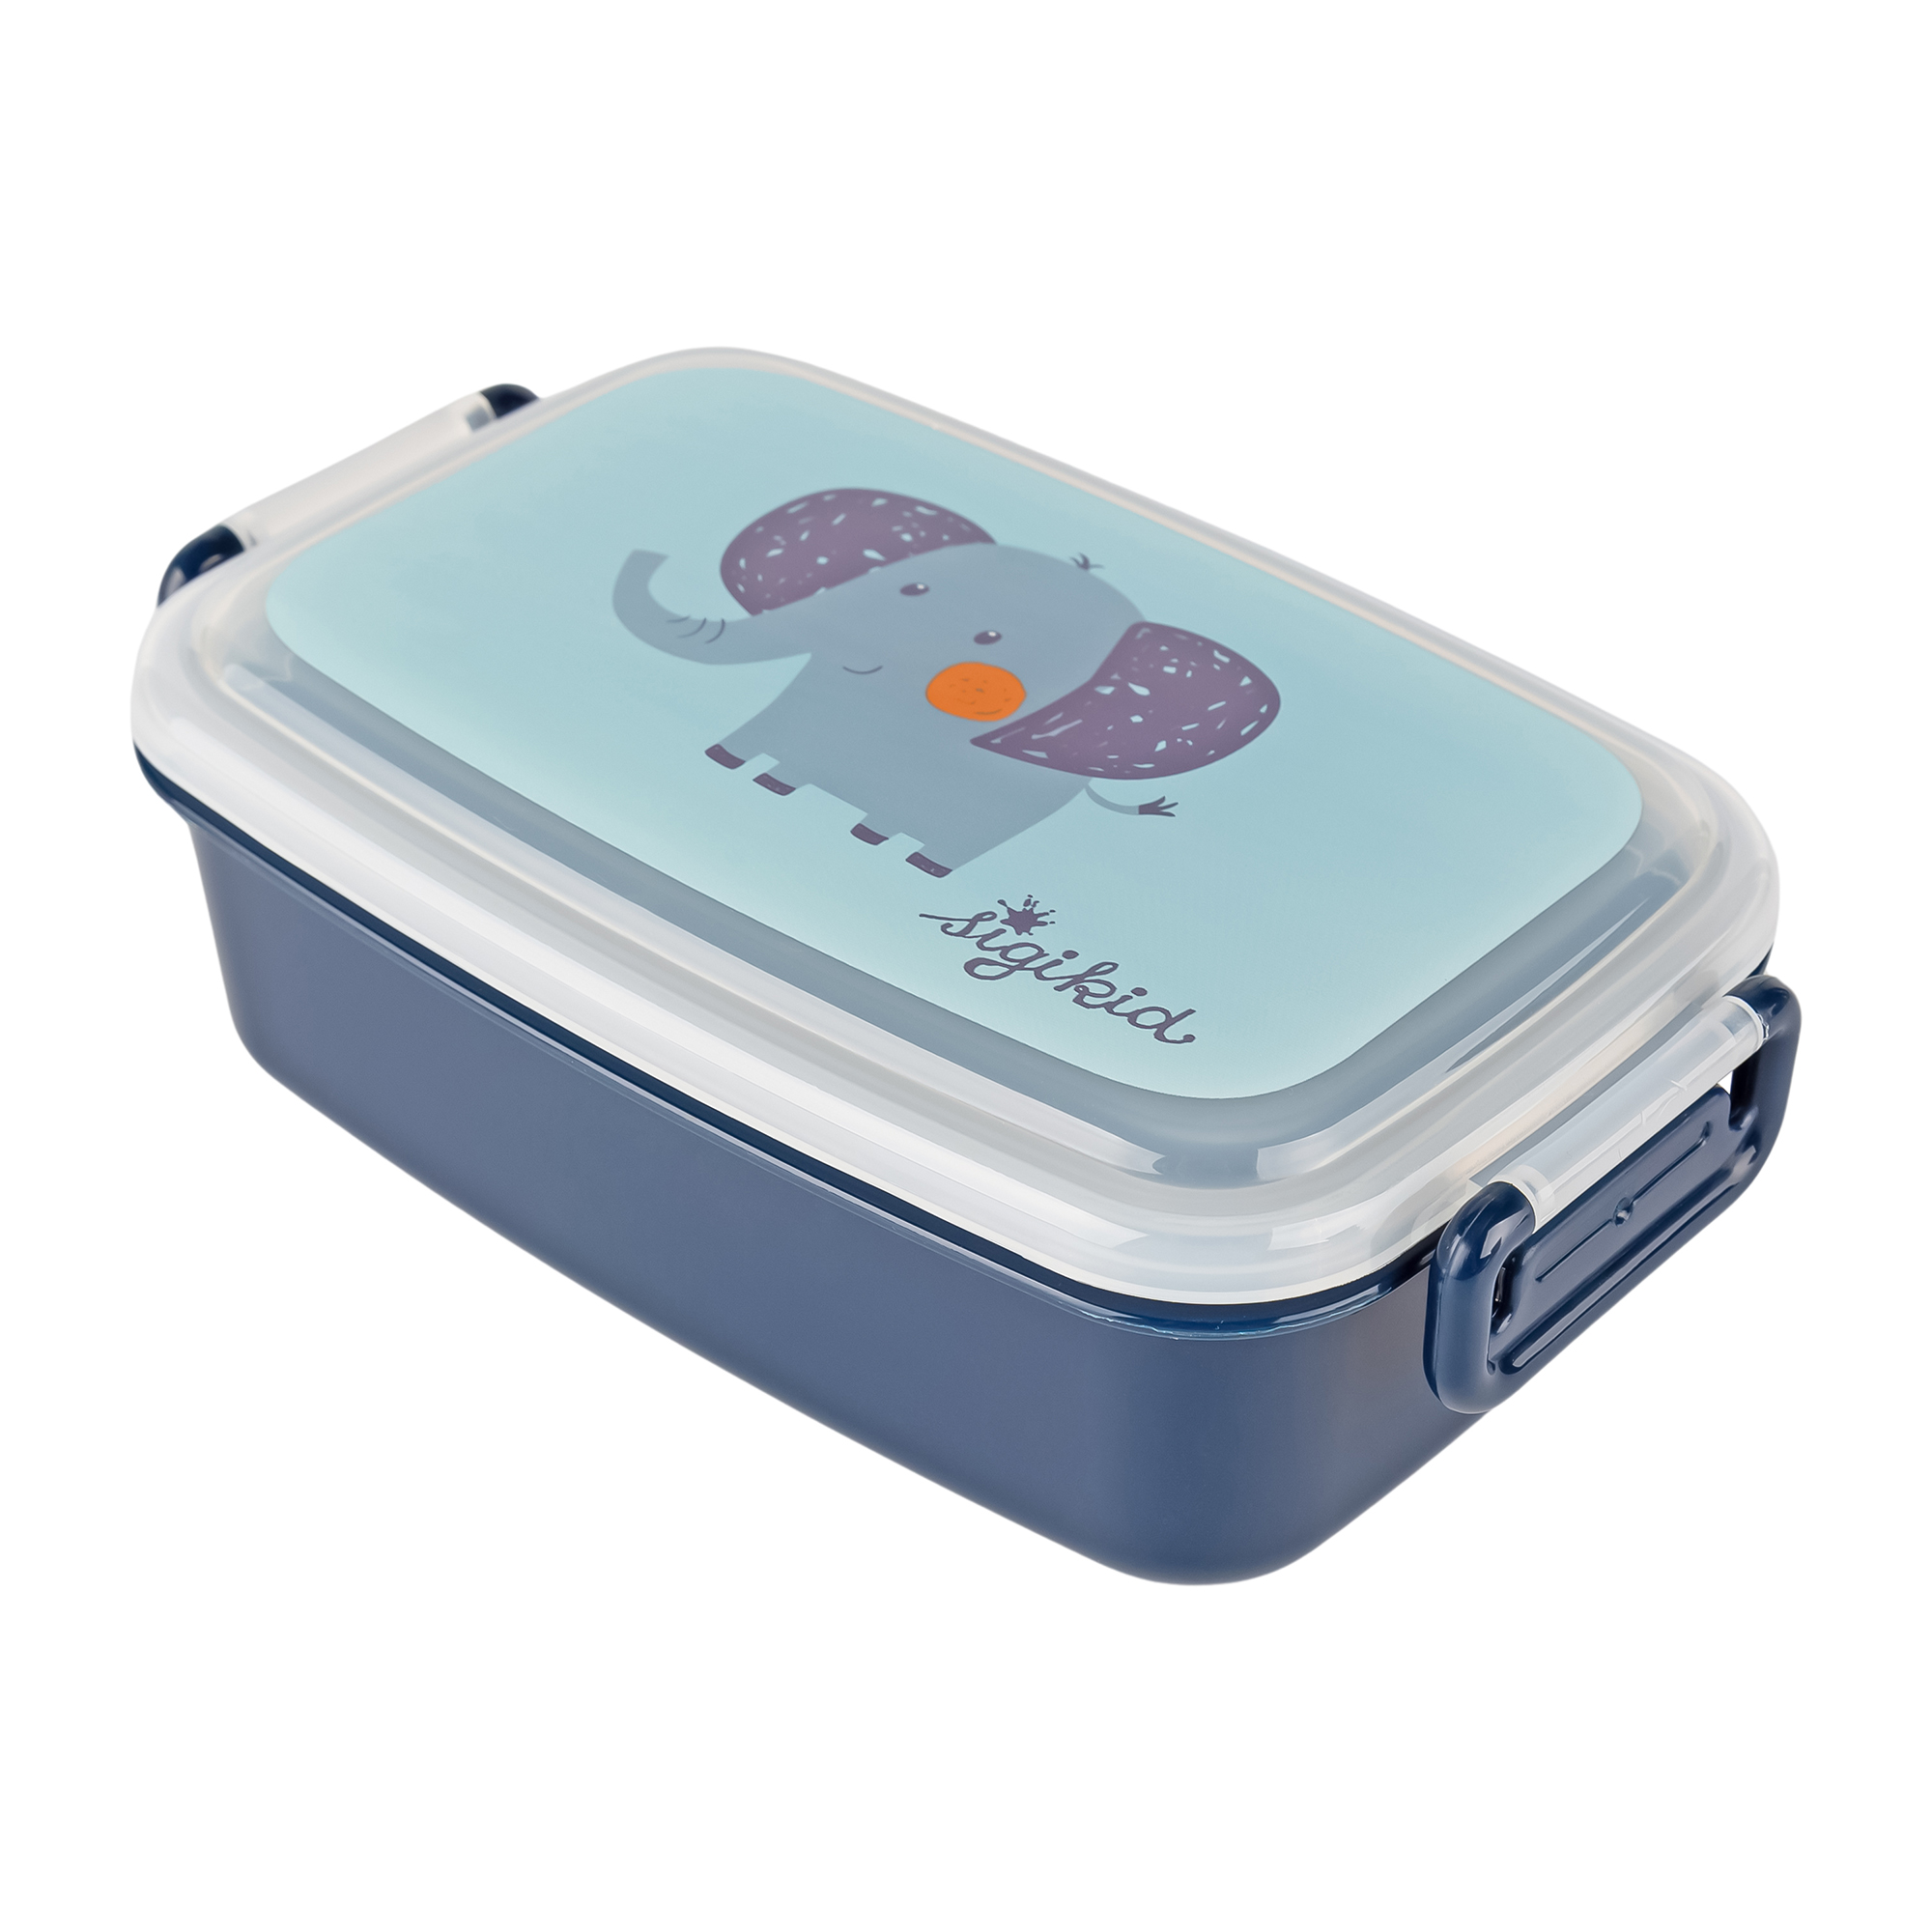 Lunchbox elephant, removable partition inside